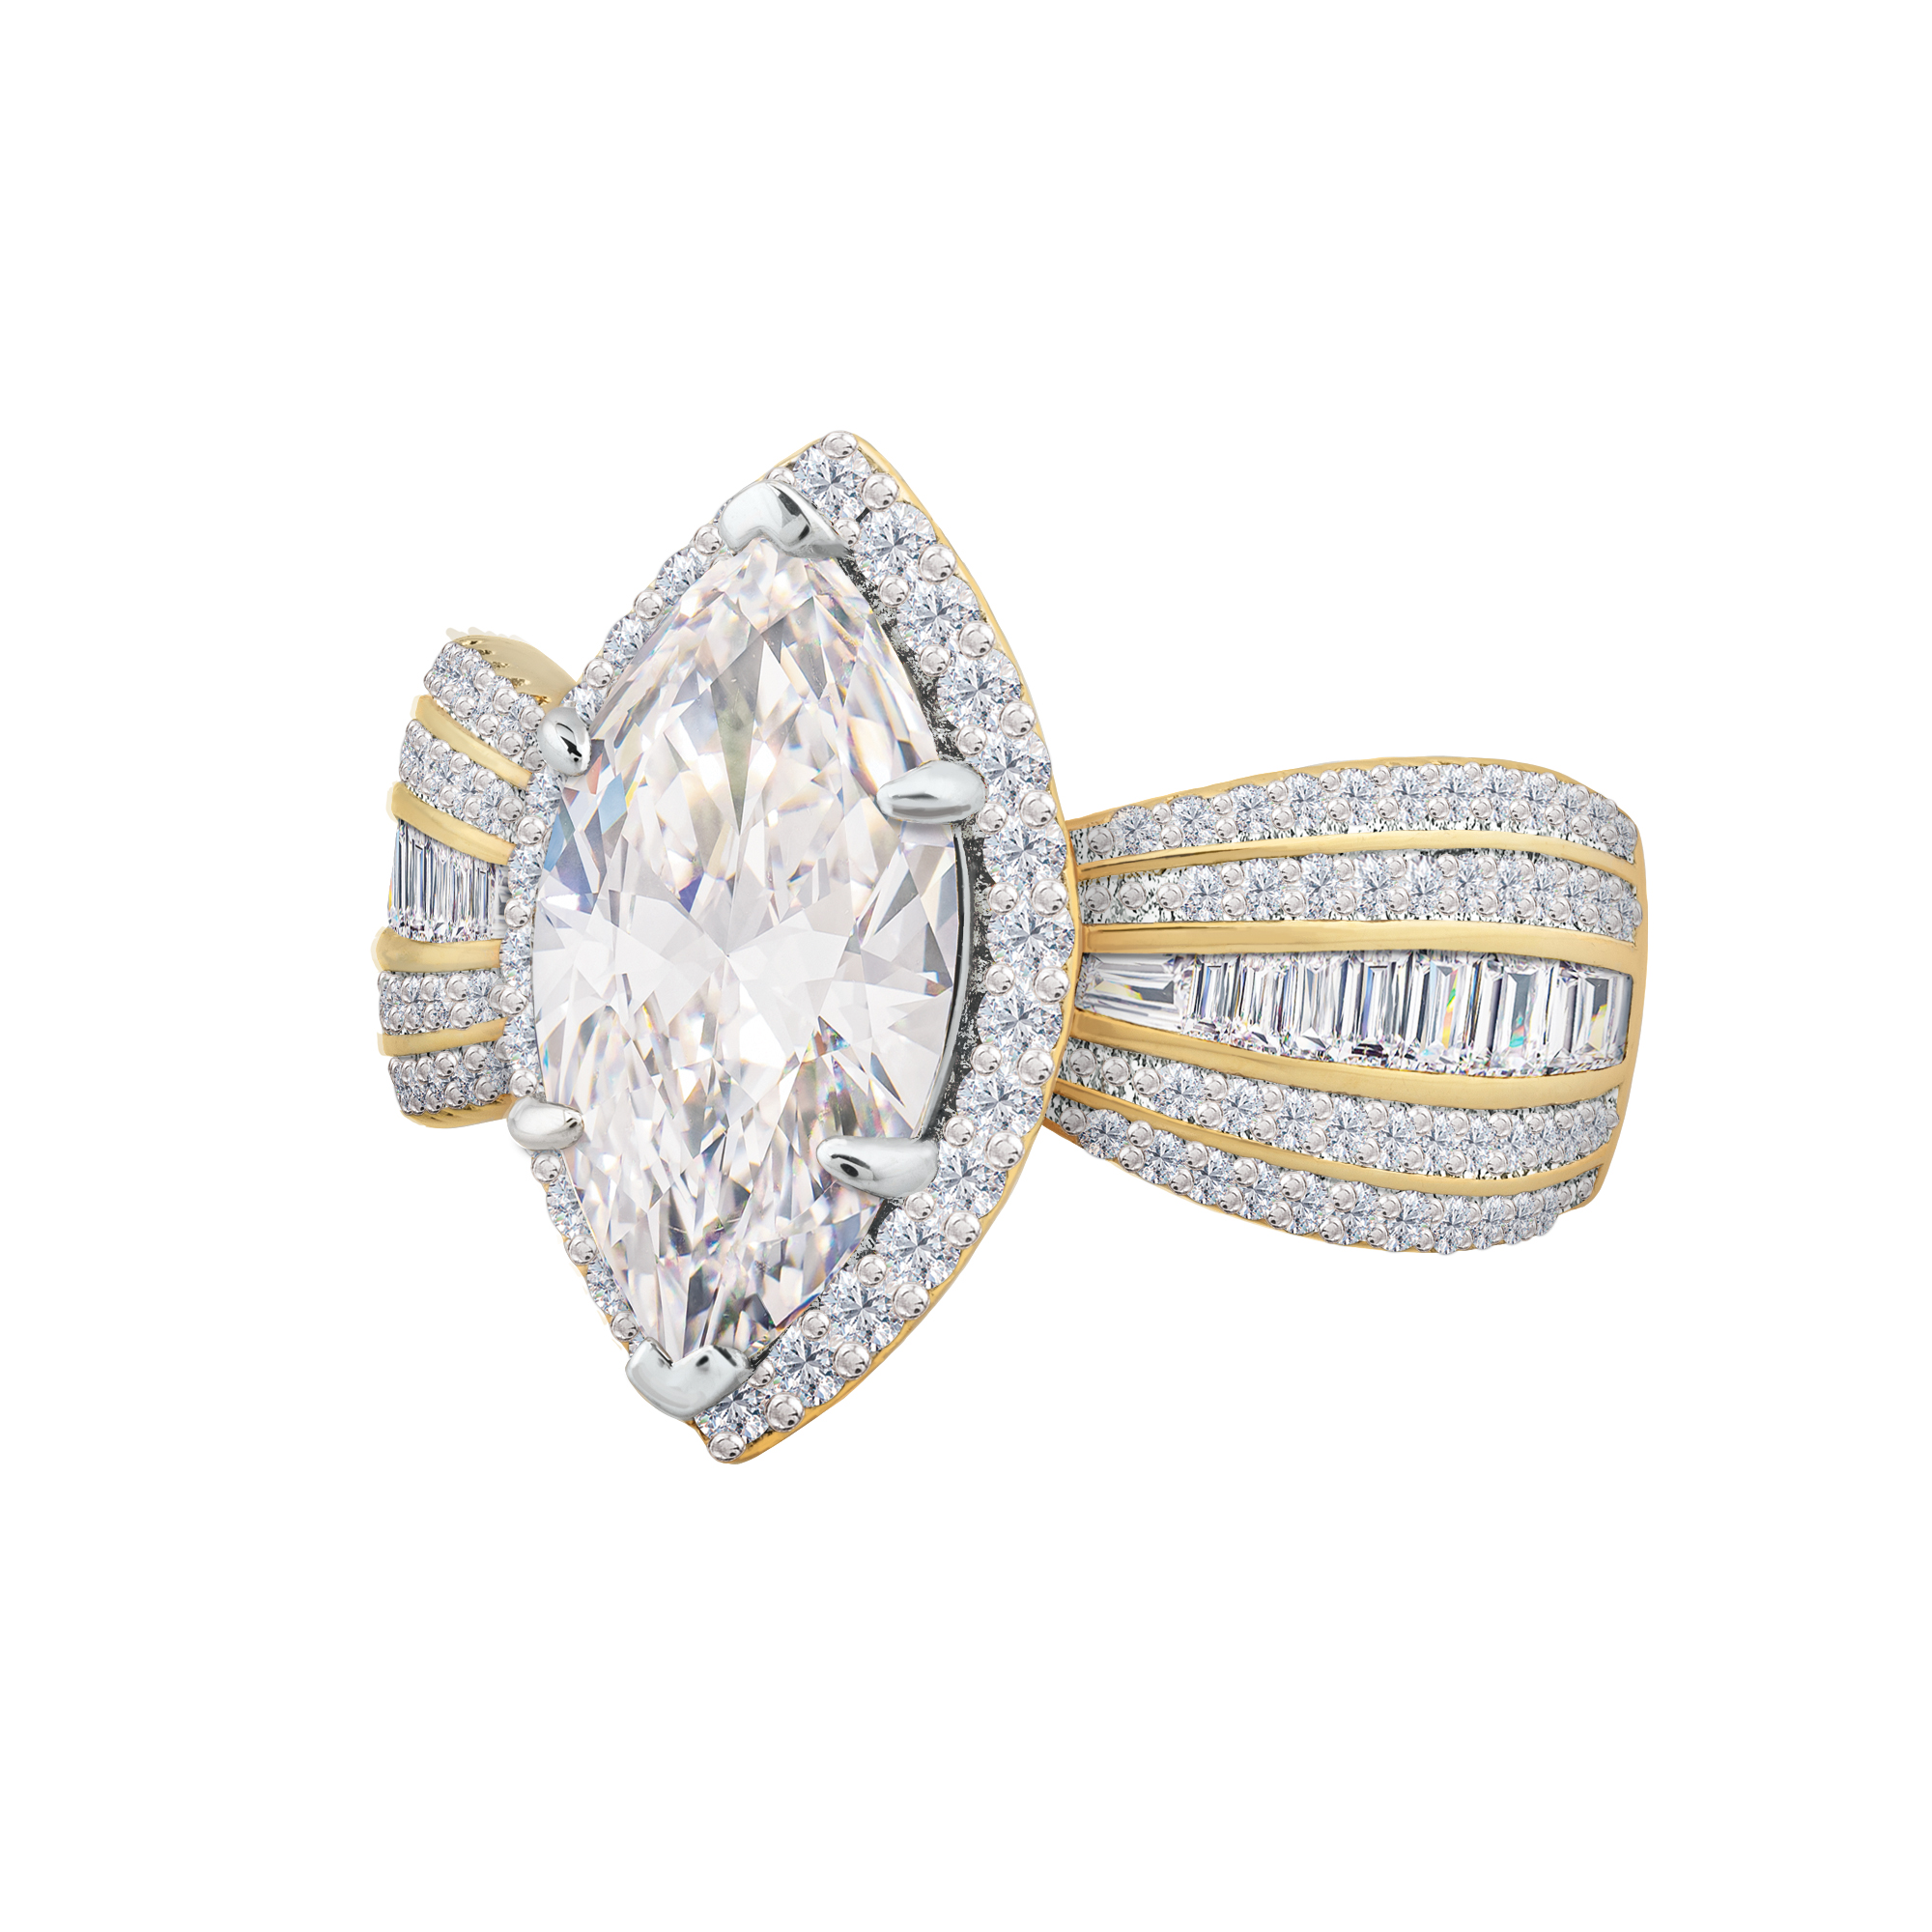 The Magnificent Marquise Diamonisse Ring 11020 0011 a main